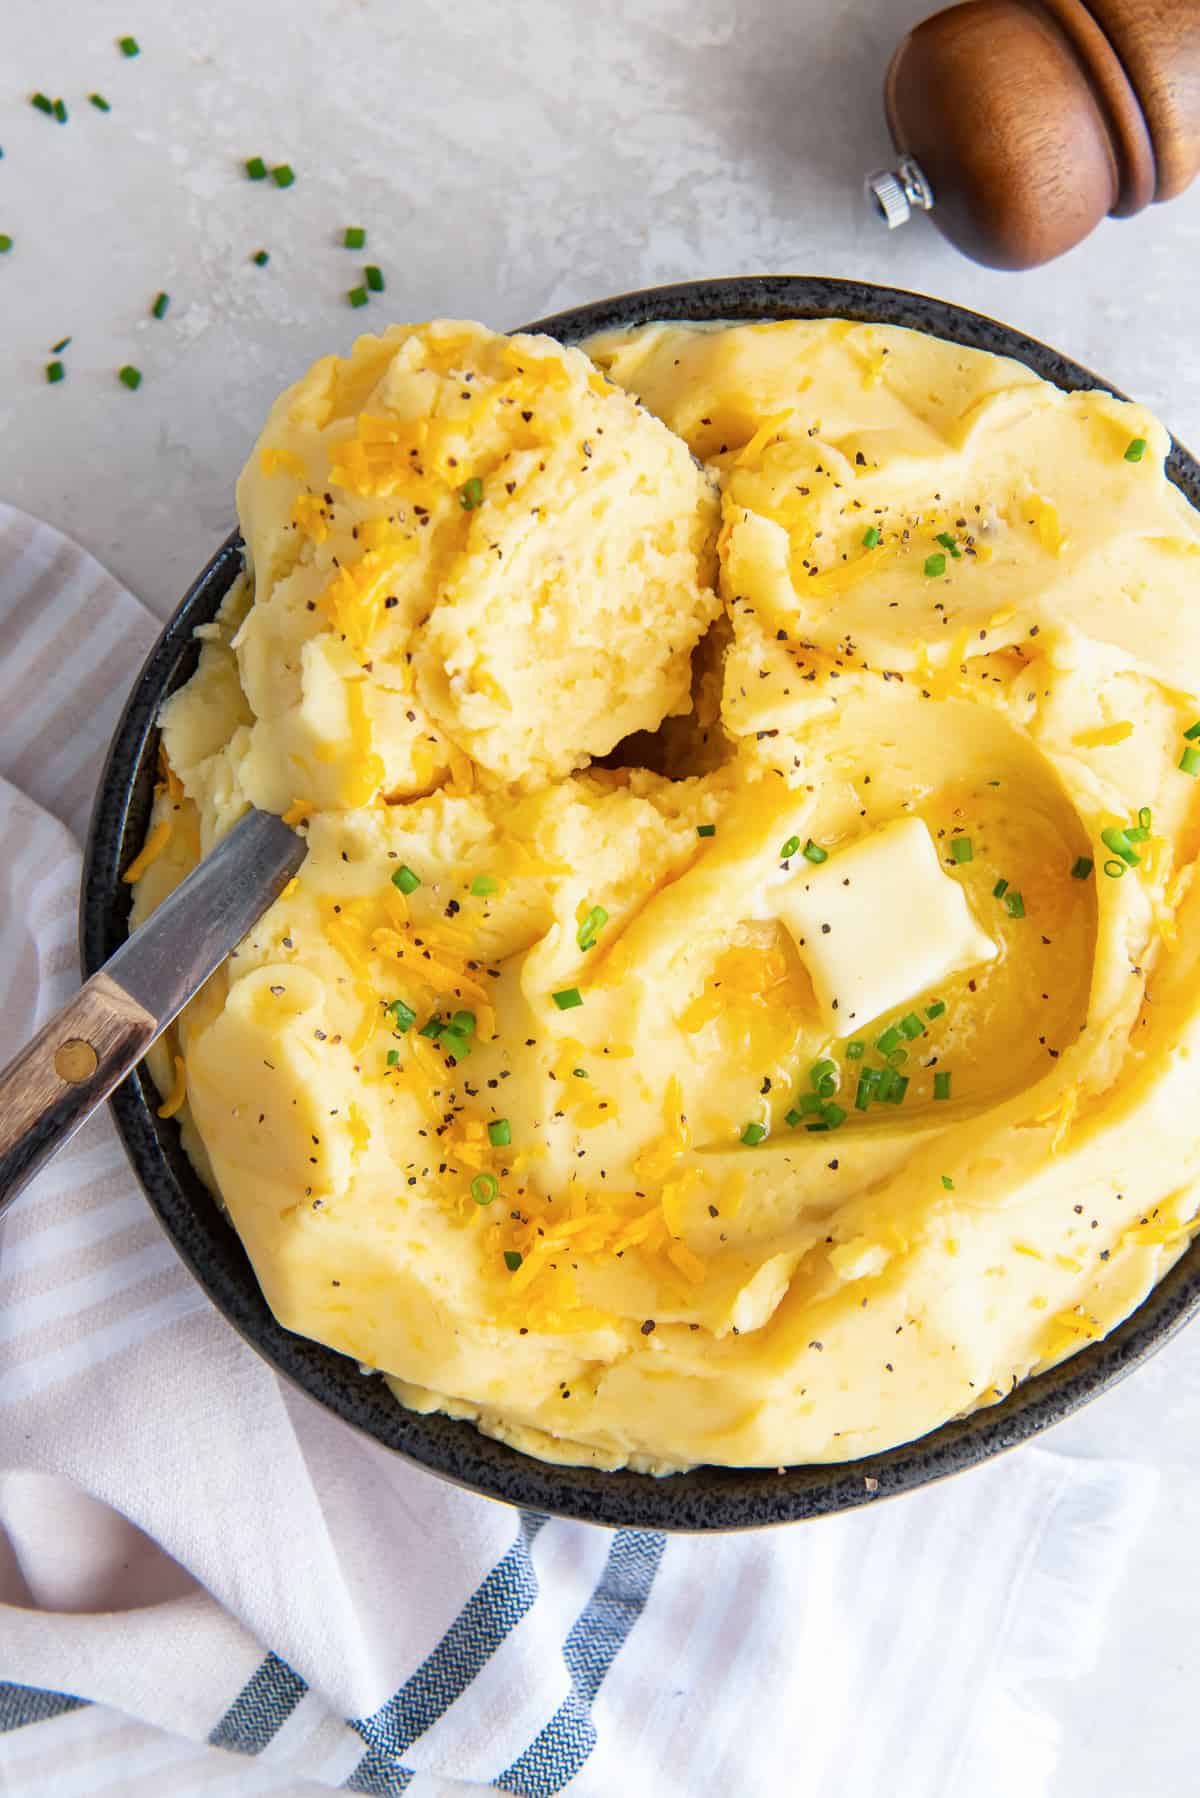 A serving spoon resting in a bowl of cheddar cheese mashed potatoes.